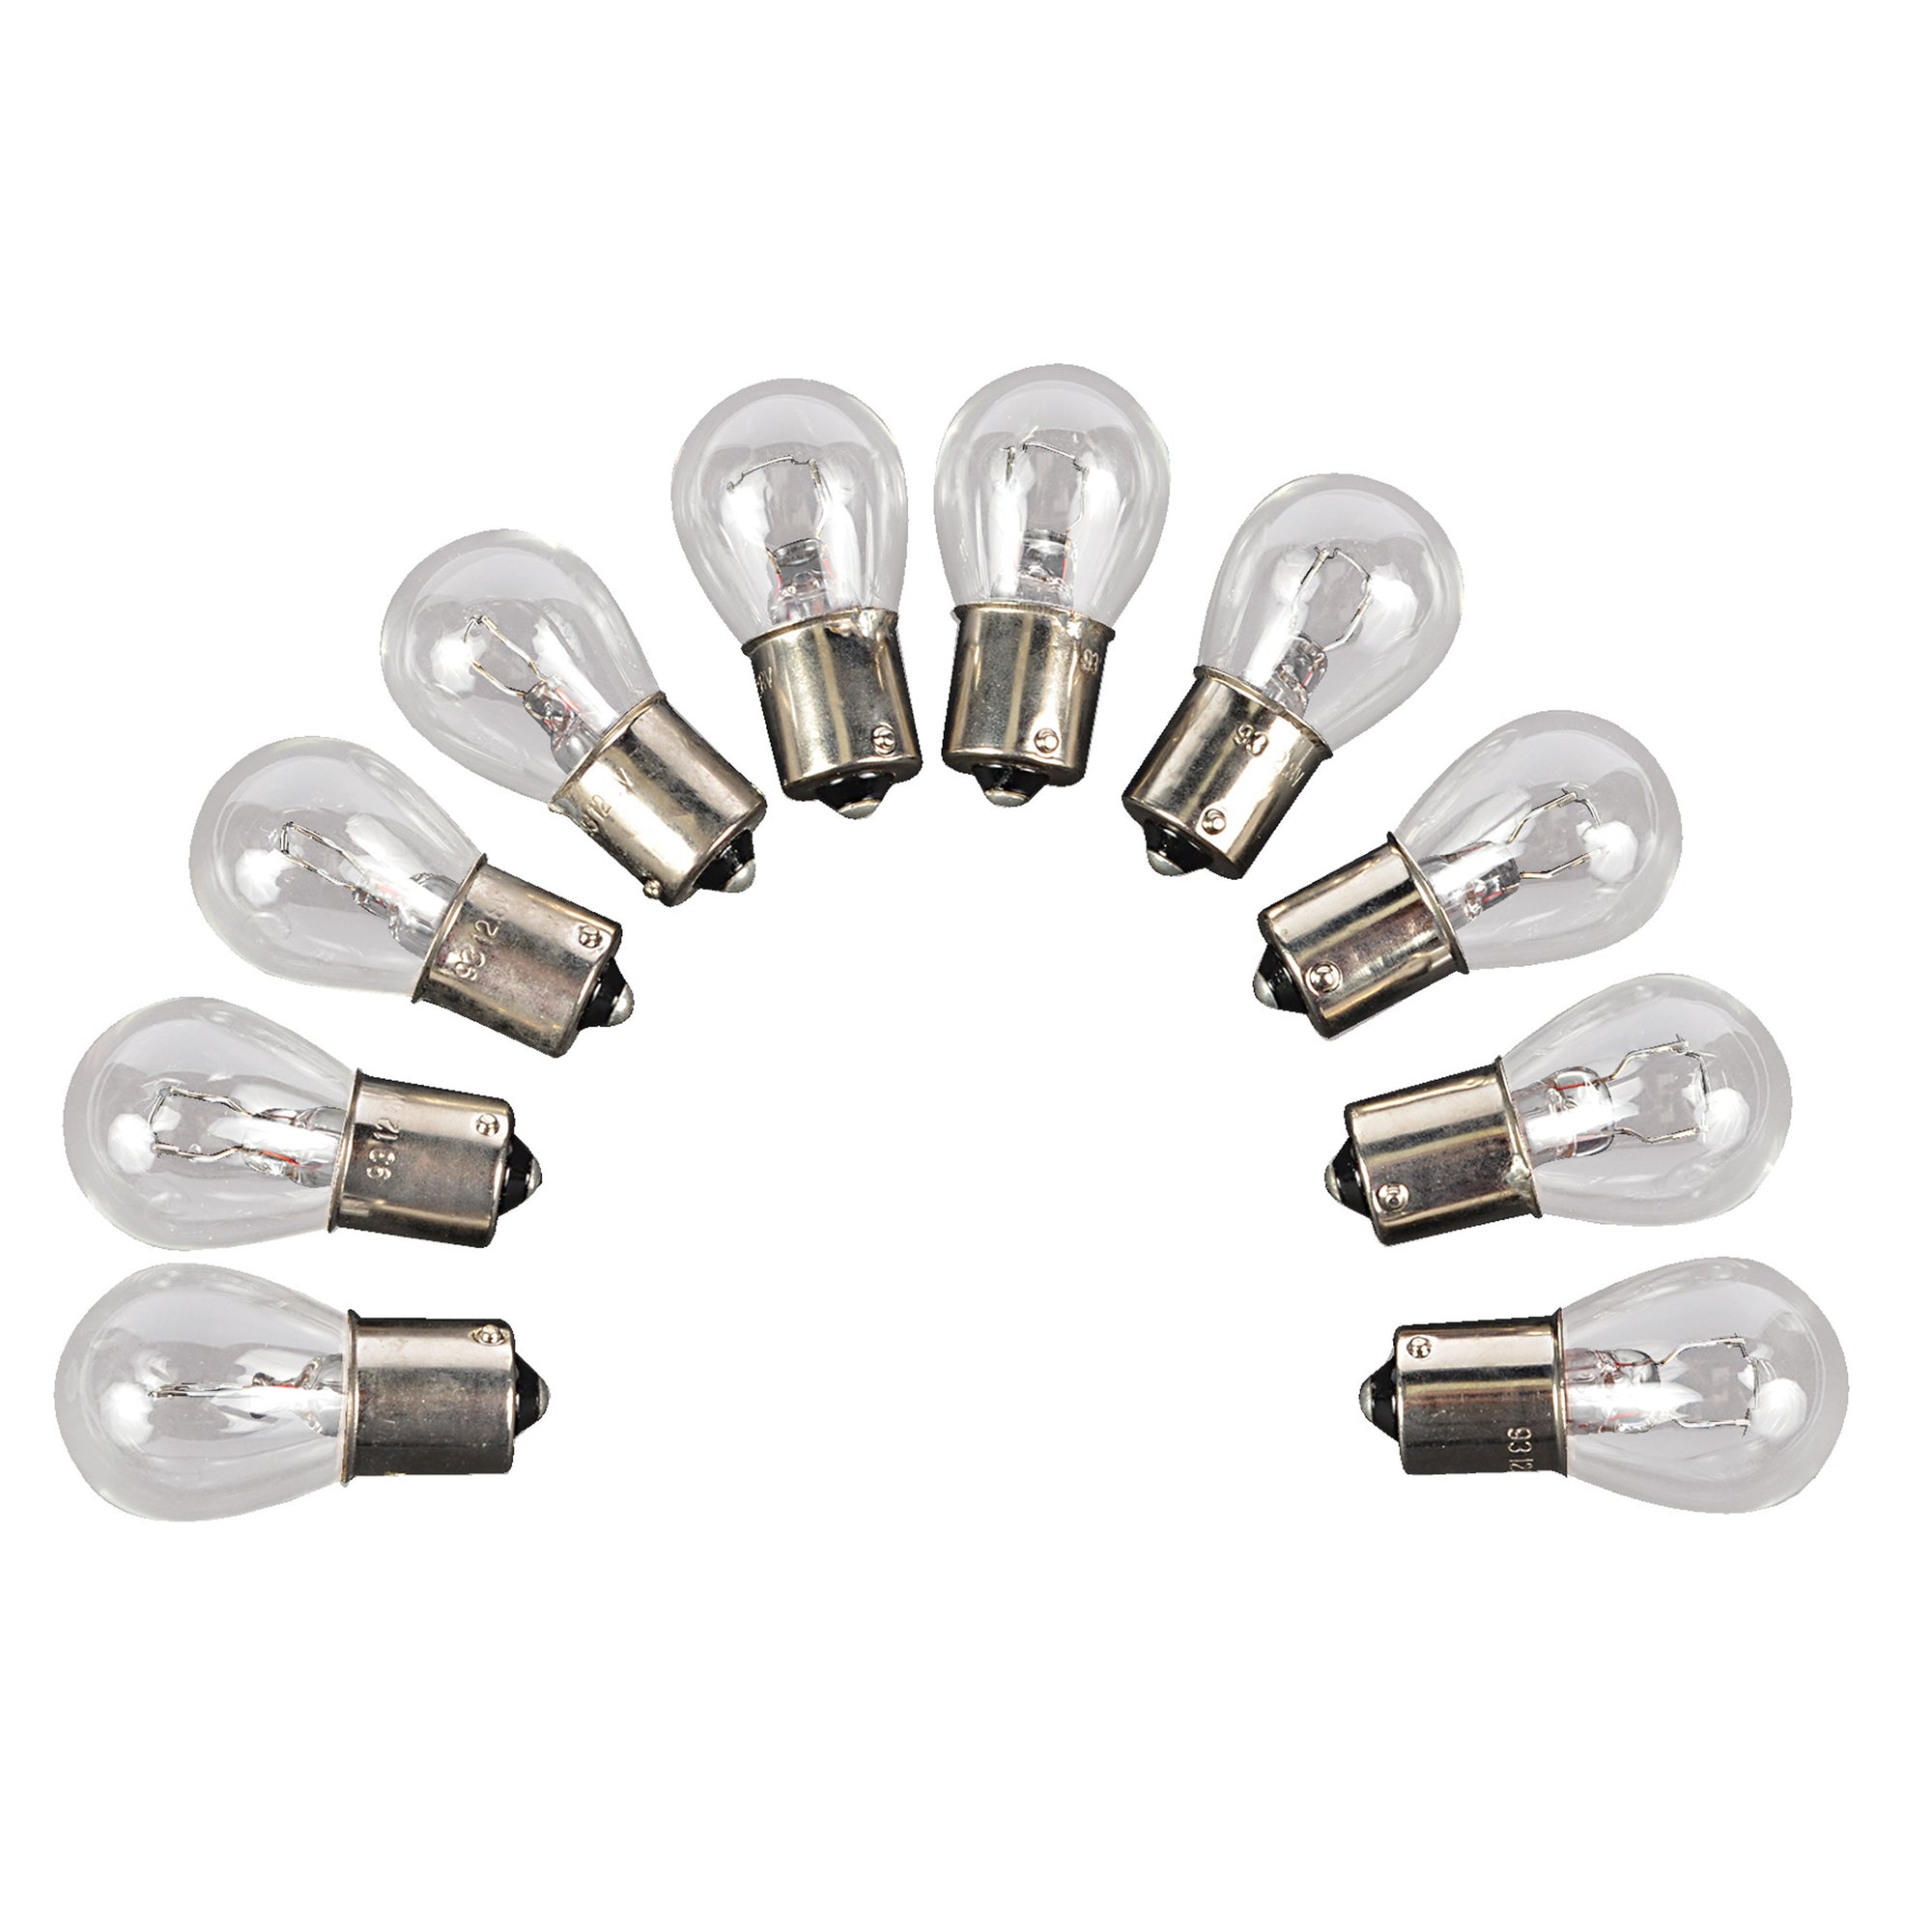 Camco 54730 #93 Auto Bulb - Pack Of 10